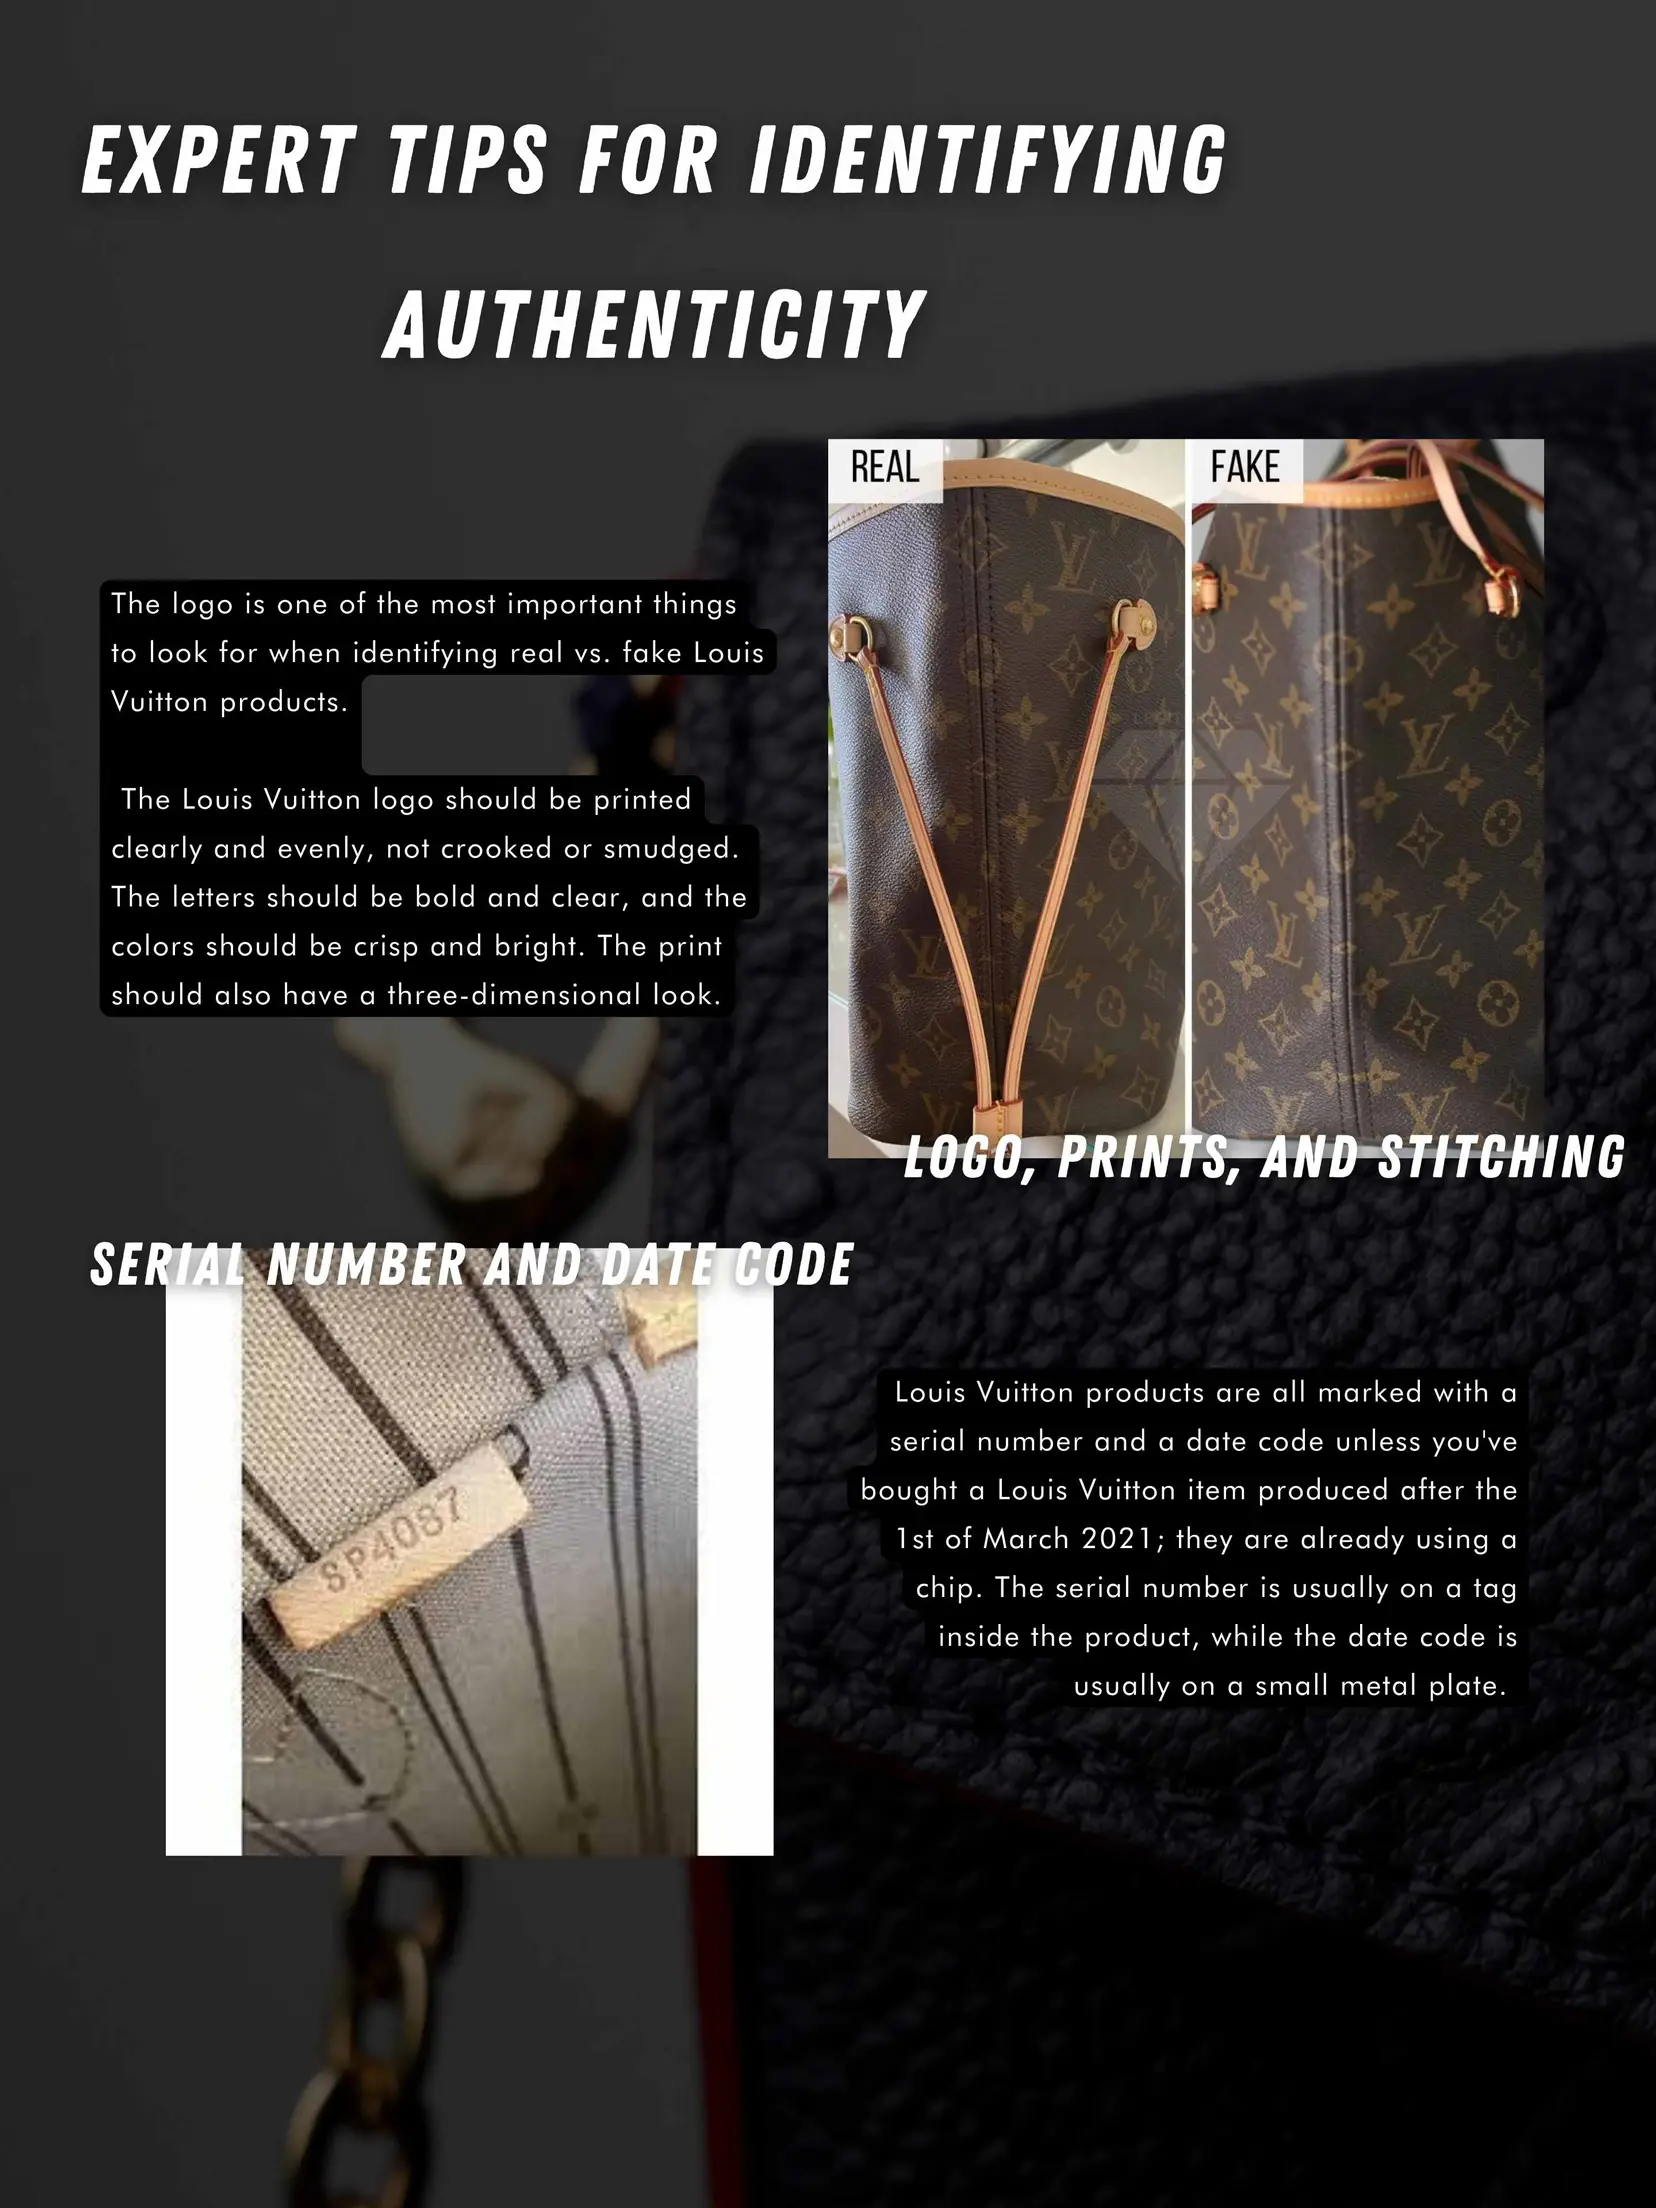 How to Quickly Identify Real vs. Fake LV, Gallery posted by Natasshanjani